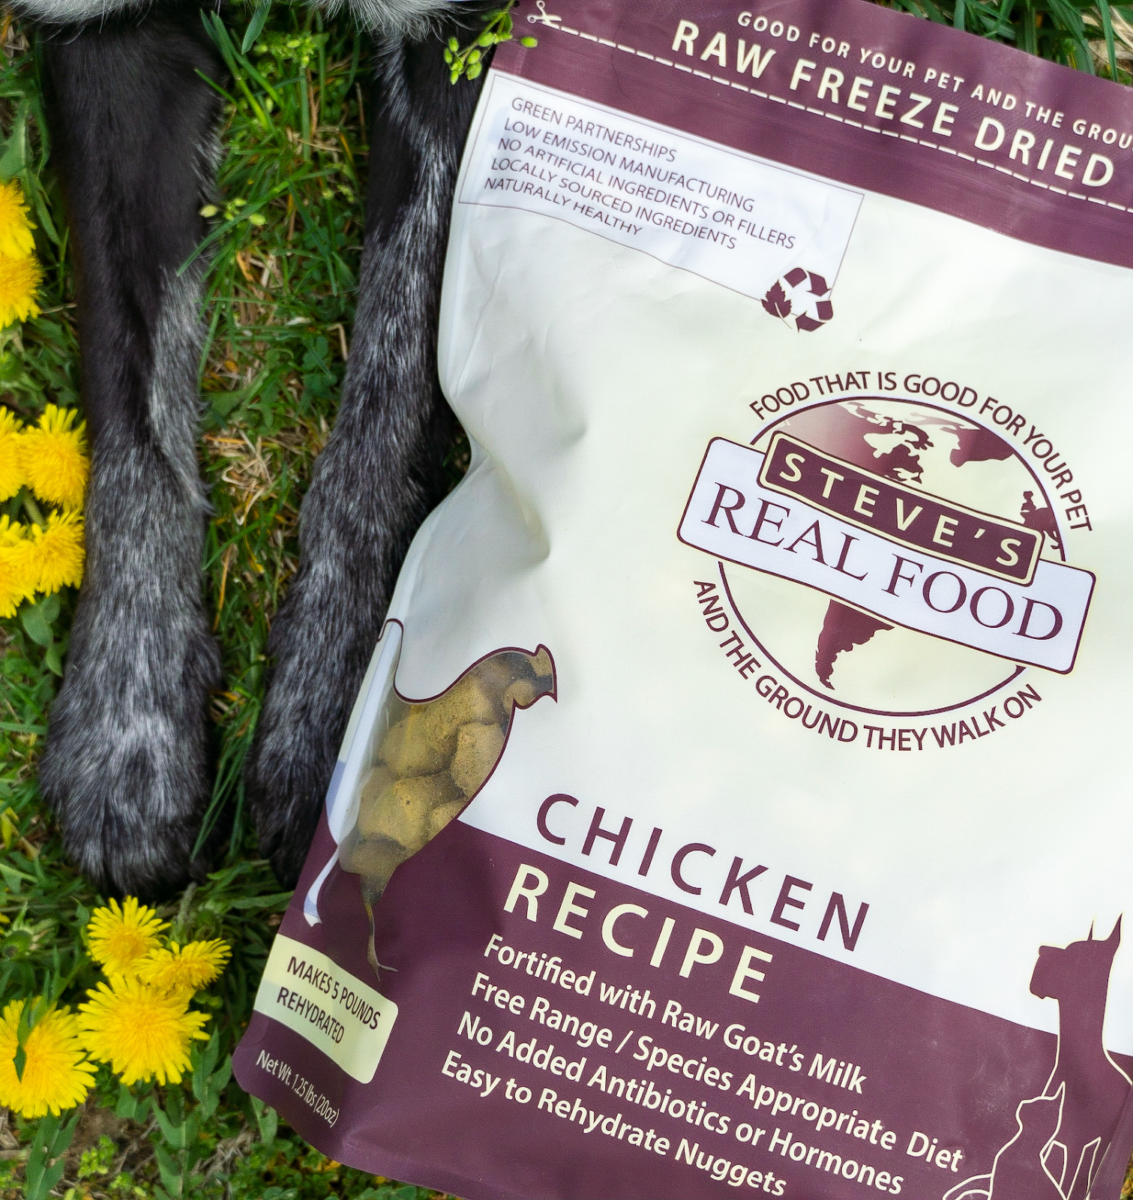 Bag of Raw Freeze Dried Pet Food chicken recipe